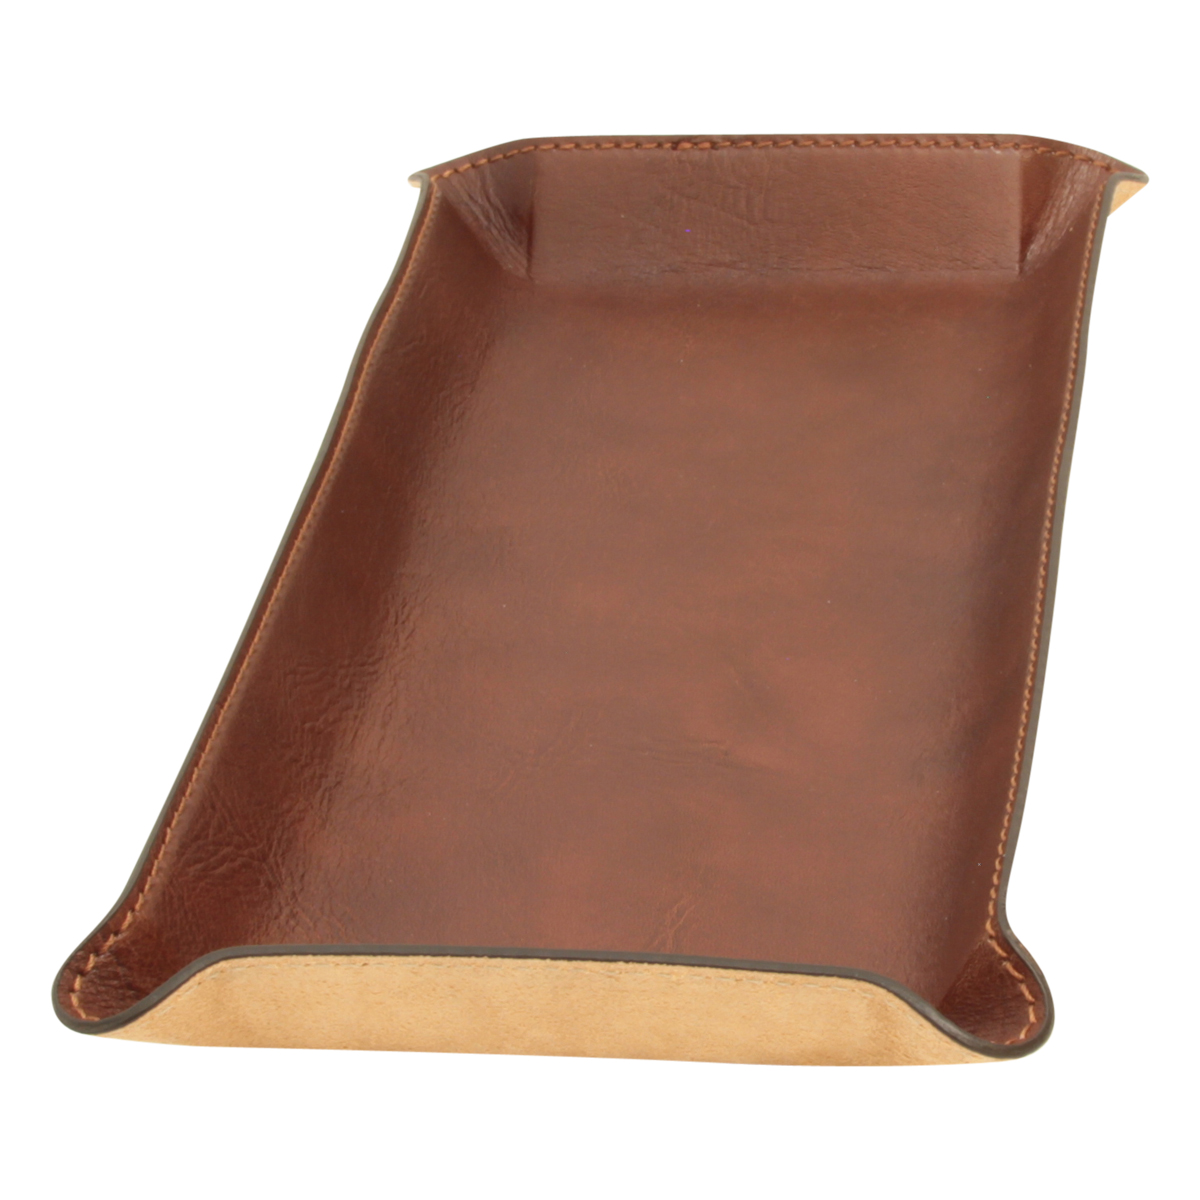 Leather Desk Tray - Brown | 762089MA | EURO | Old Angler Firenze